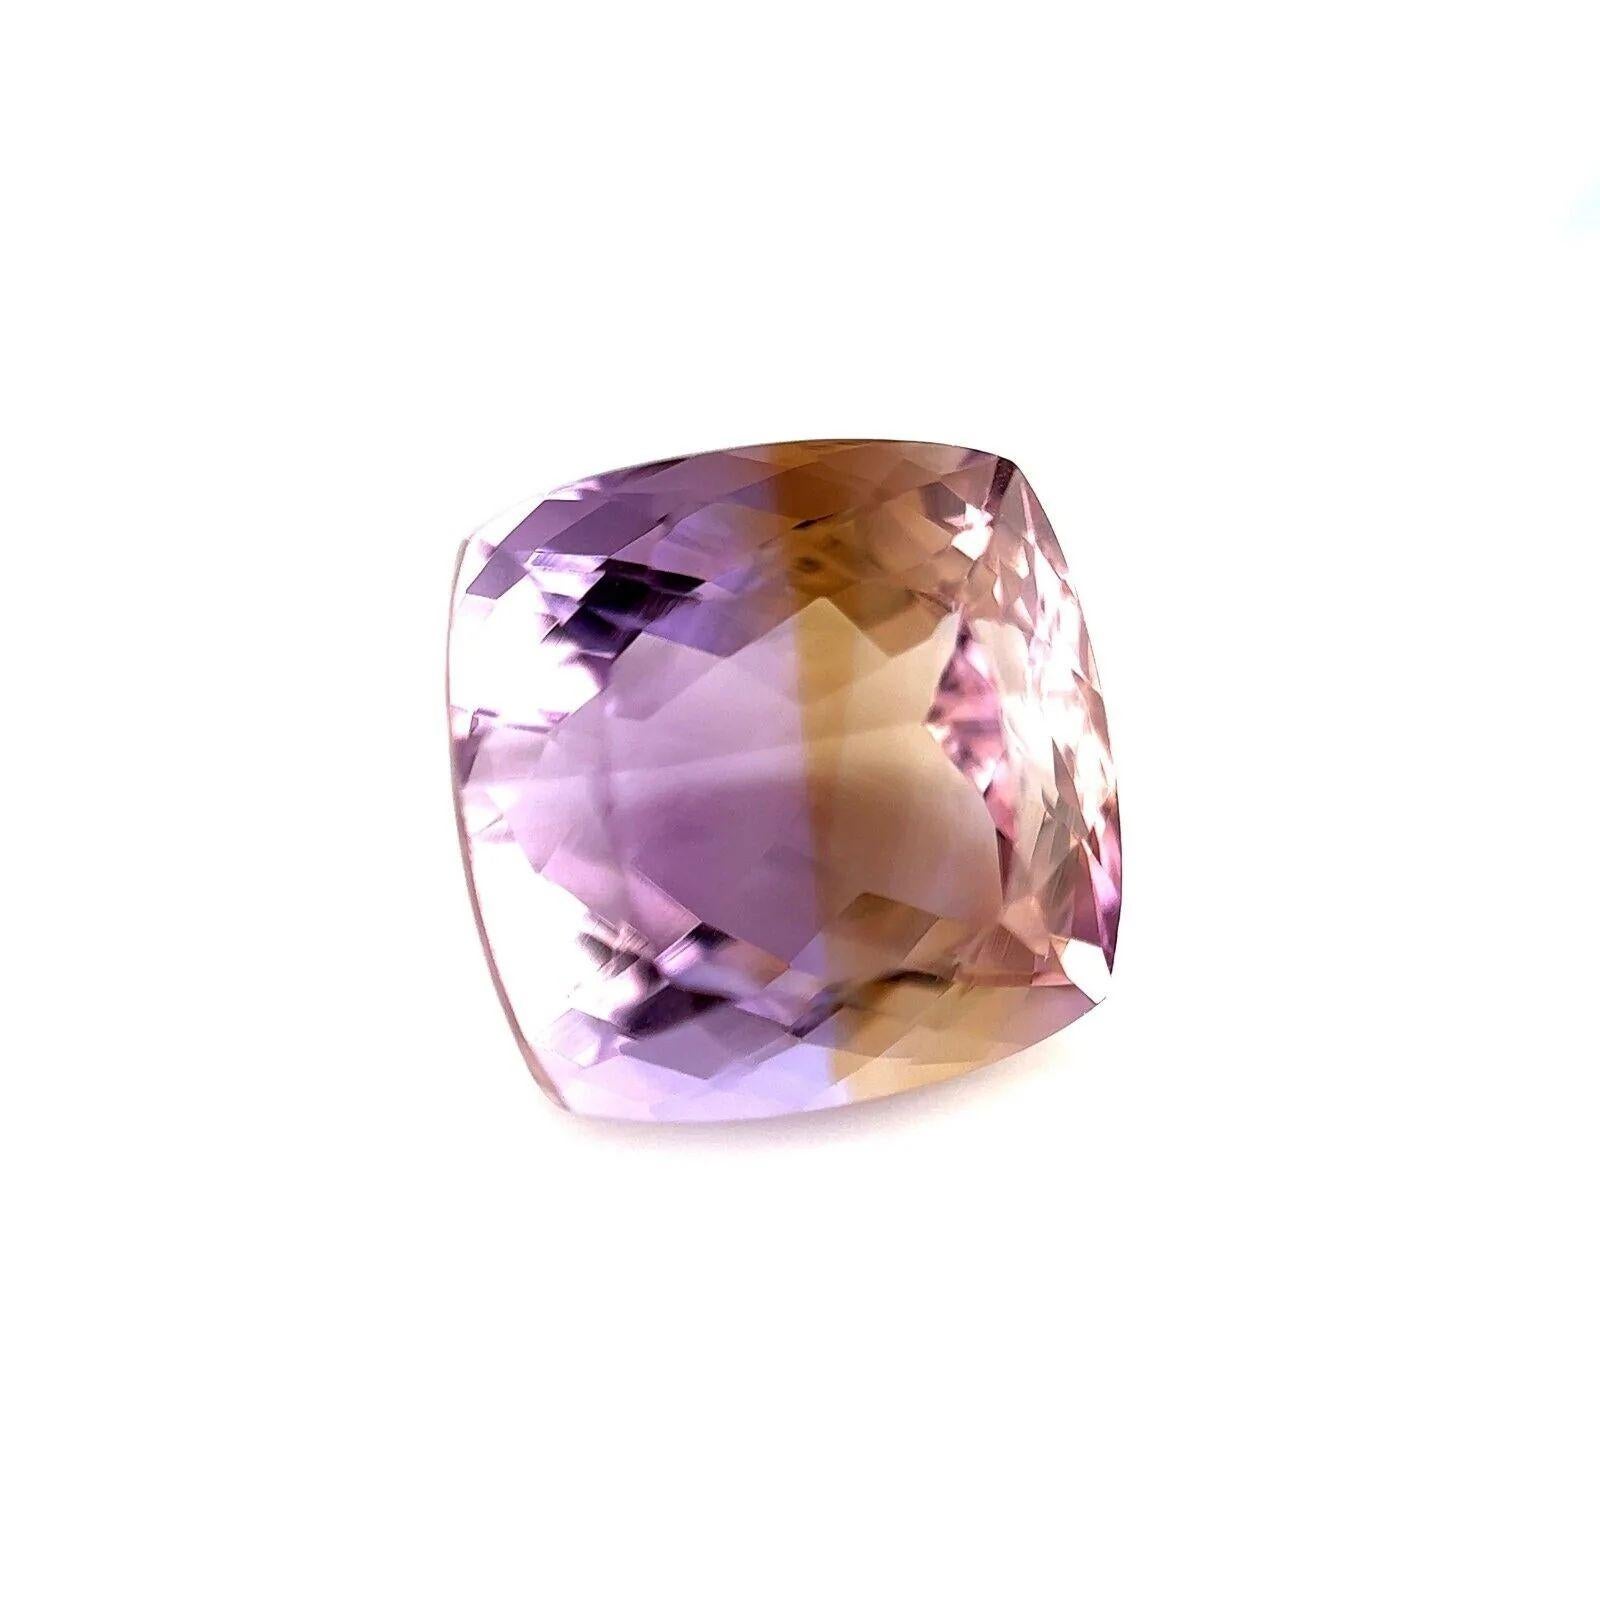 13.53ct Natural Ametrine Fancy Cushion Cut Purple Yellow Bi Colour 13.5x13.2mm

Fine Natural Ametrine Gemstone.
13.53 Carat natural ametrine with an excellent fancy cushion cut and beautiful colour split of yellow and purple.
Also has excellent